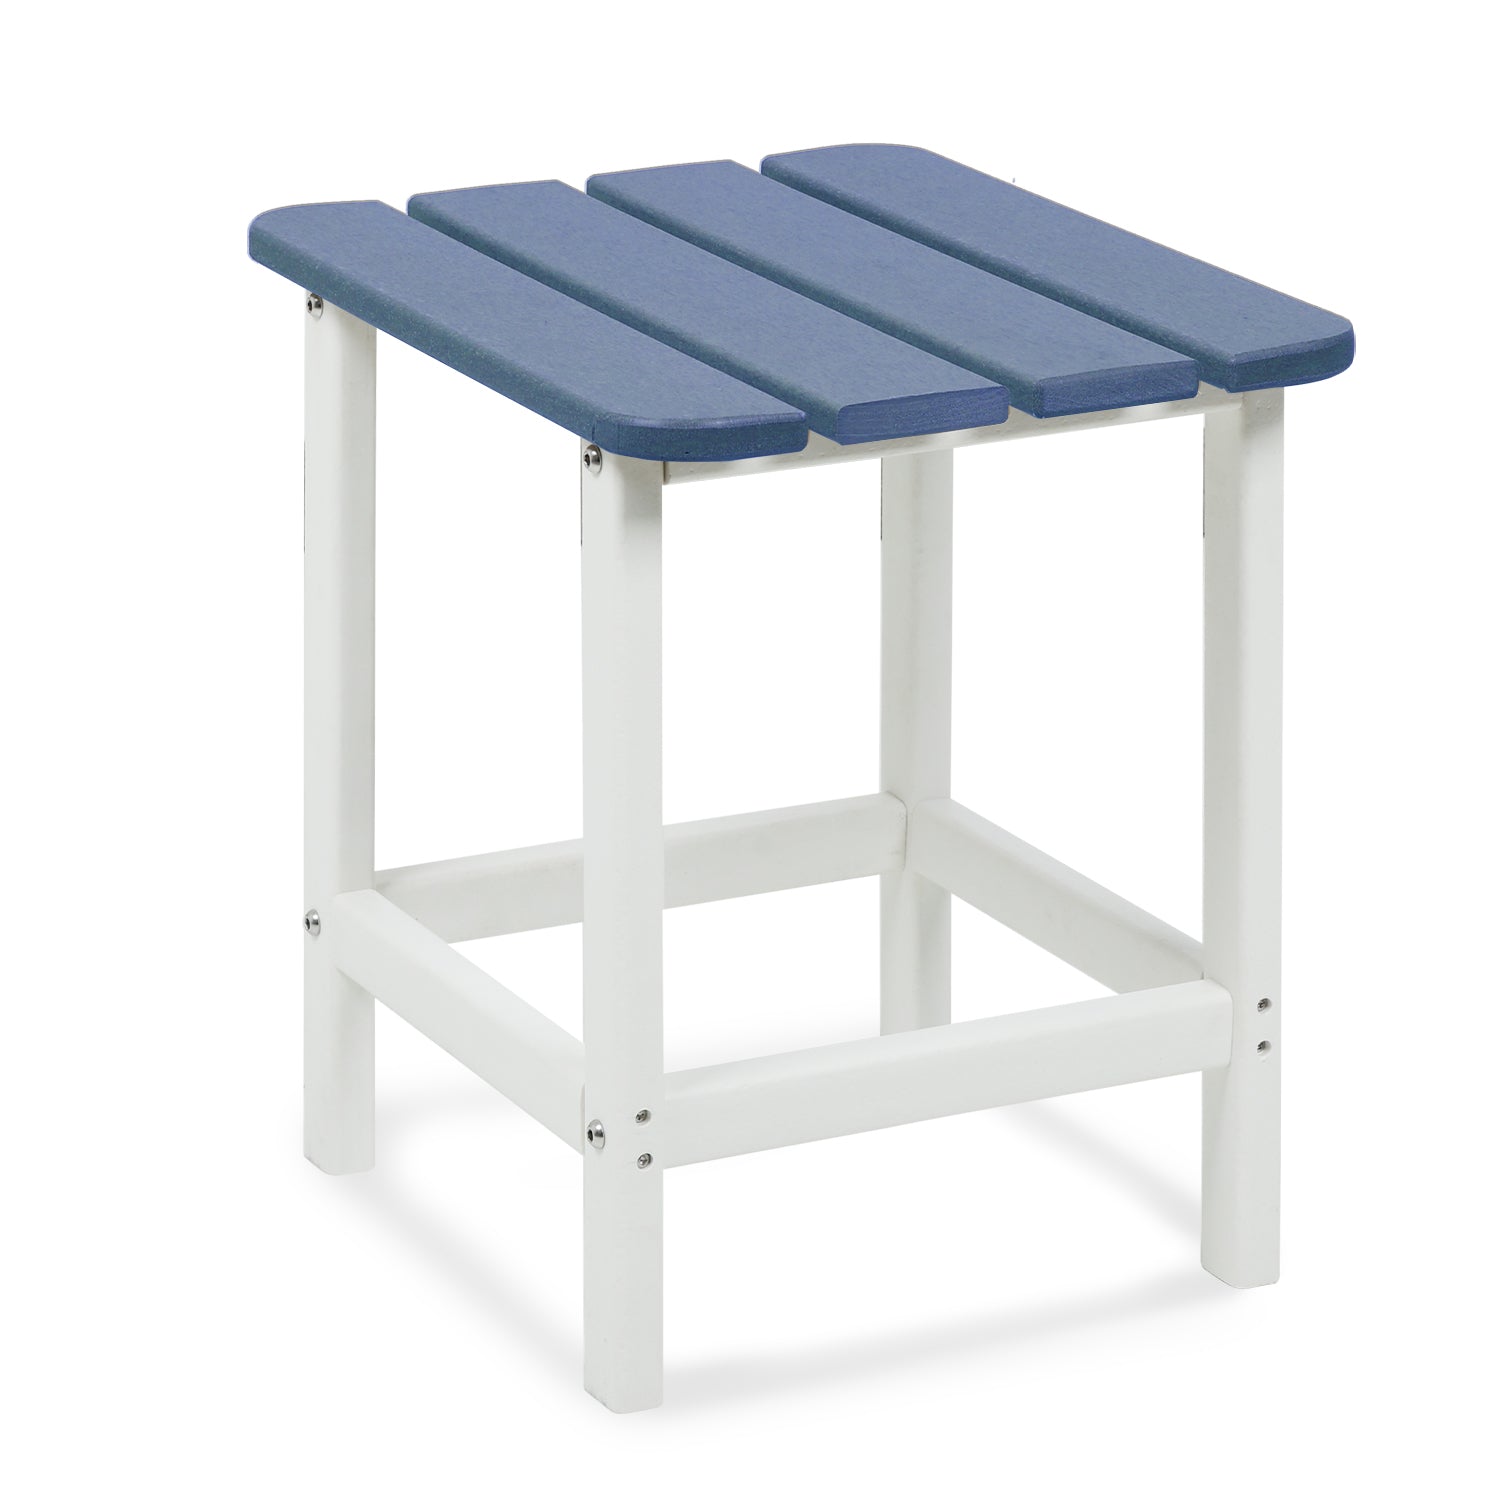 Outdoor Side Table, Square Adirondack Patio End Table for Patio, Pool, Porch Furniture Aoodor Blue  